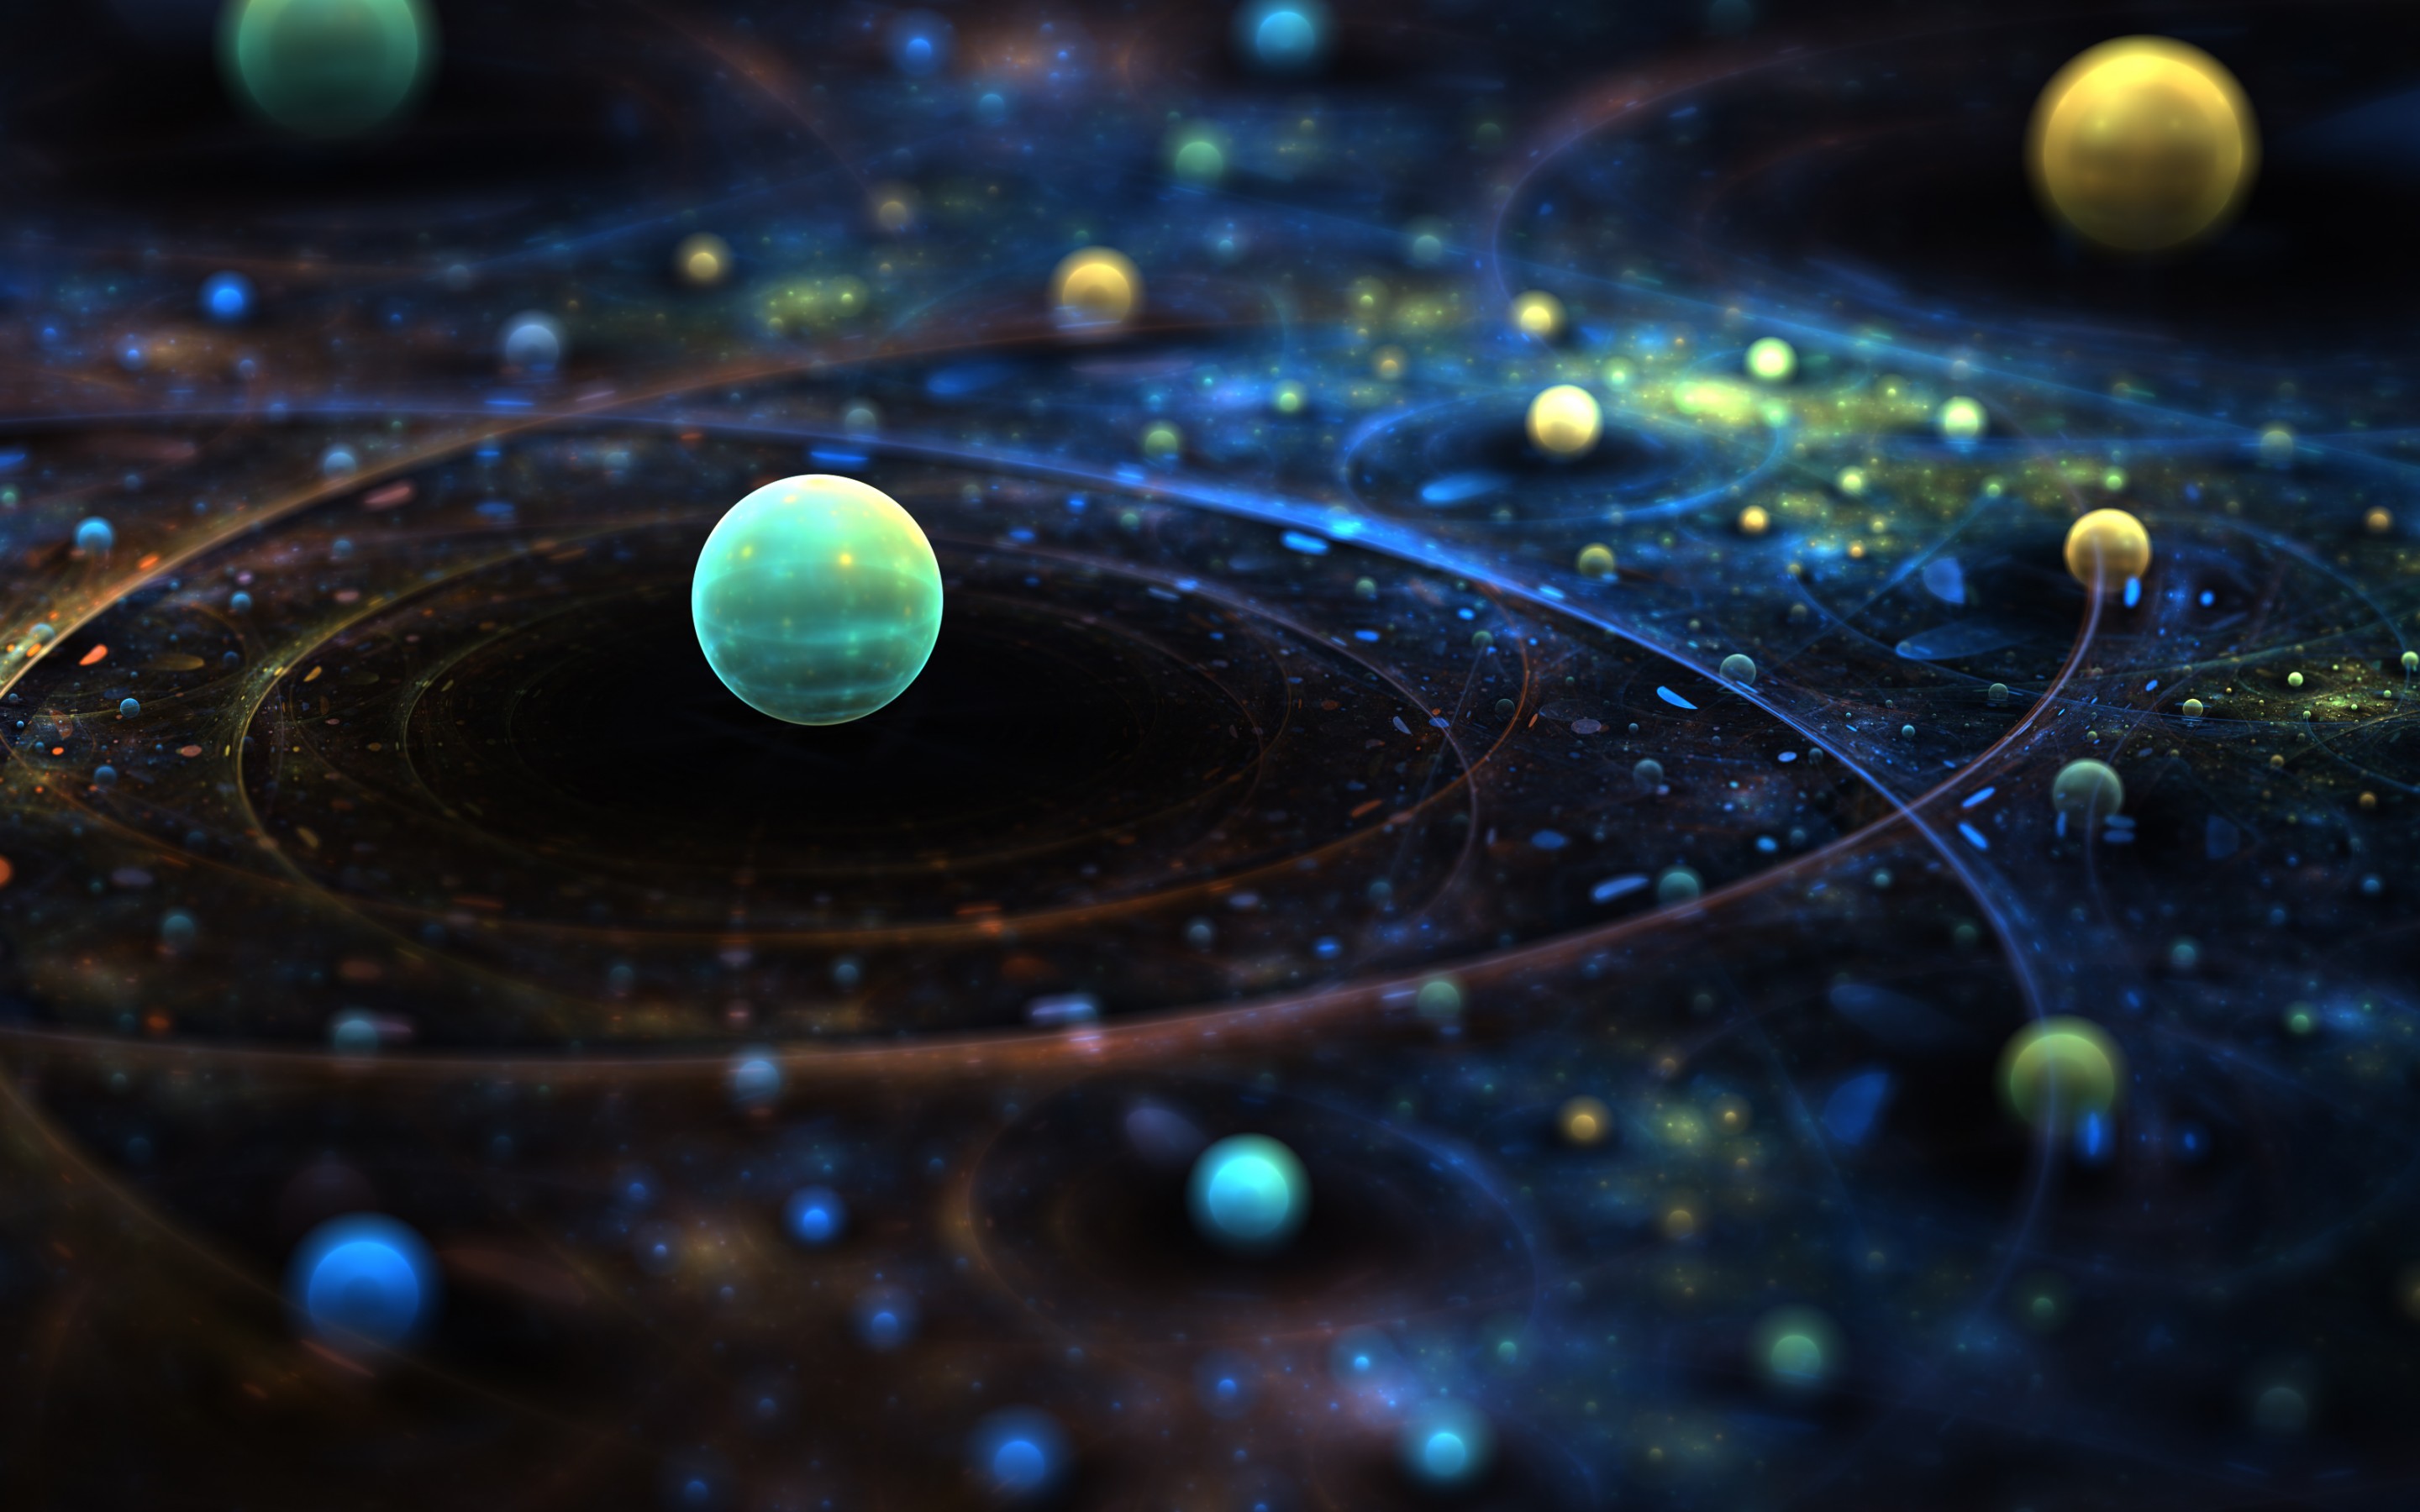  search terms solar system hd wallpaper solar system hd wallpapers 2880x1800